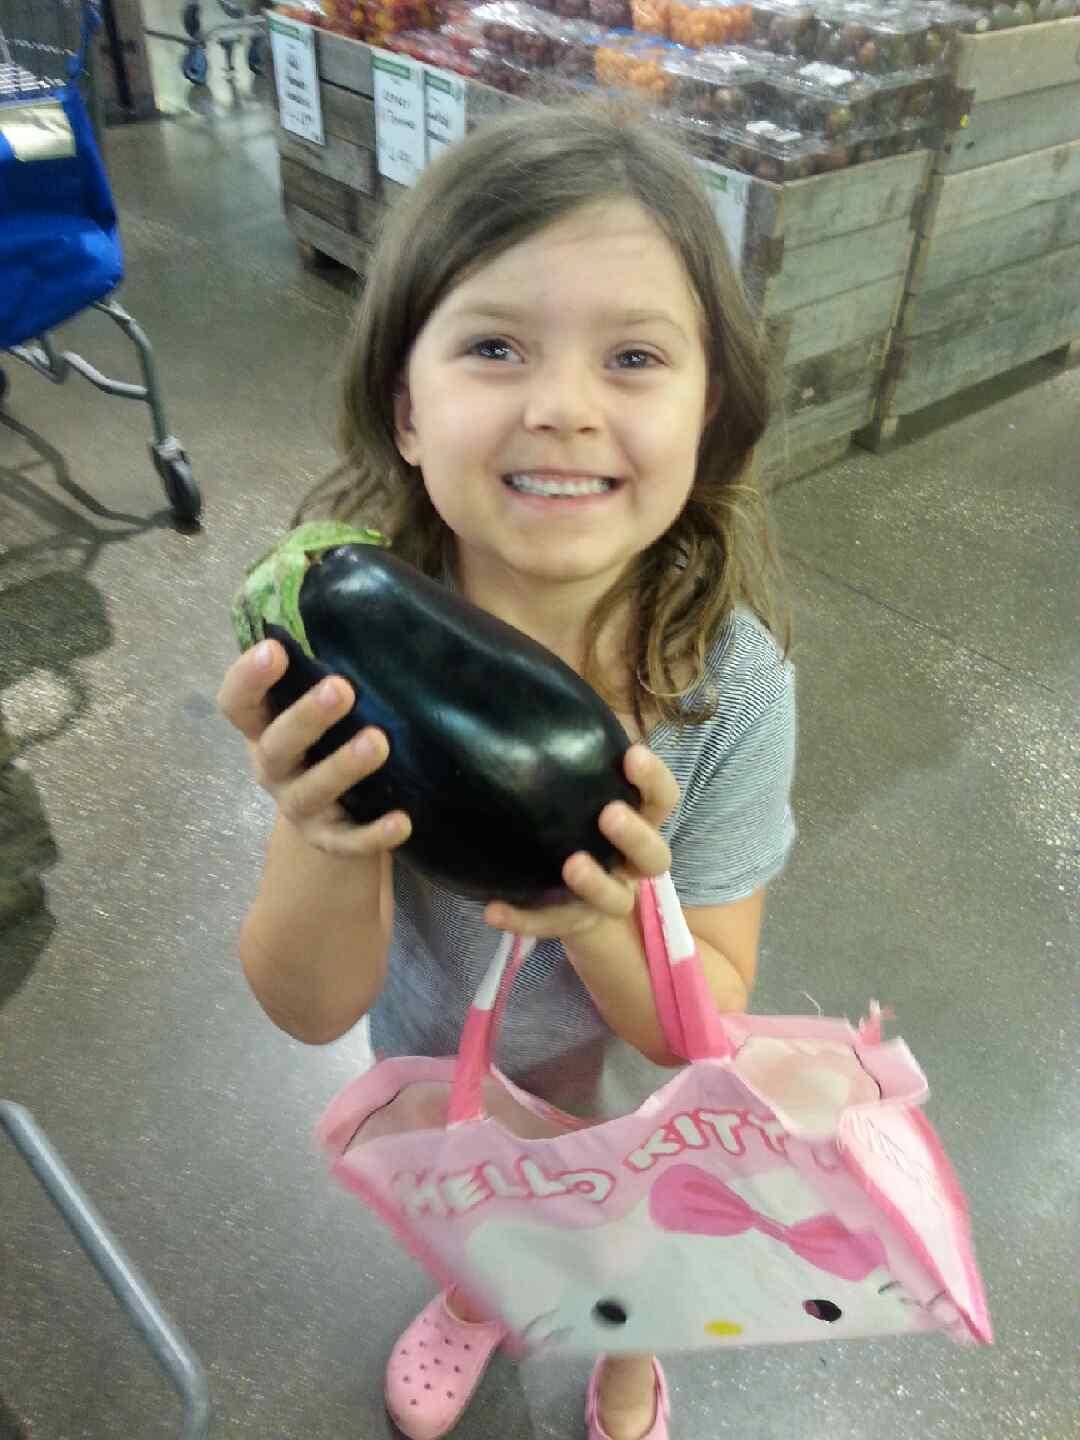 Zoey holding an eggplant